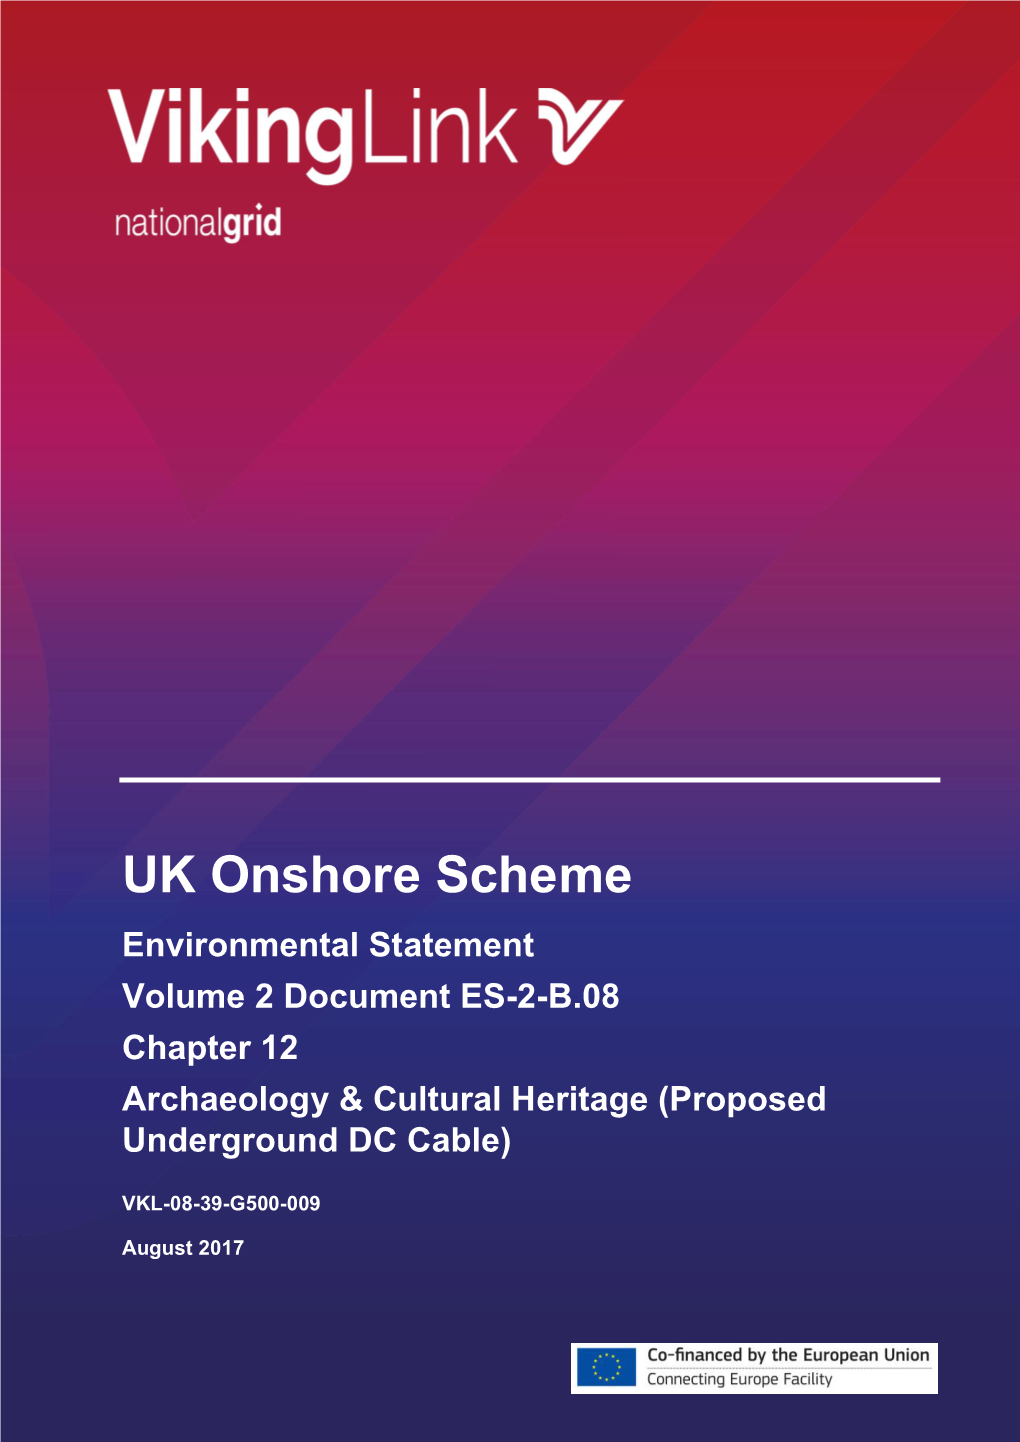 UK Onshore Scheme Environmental Statement Volume 2 Document ES-2-B.08 Chapter 12 Archaeology & Cultural Heritage (Proposed Underground DC Cable)